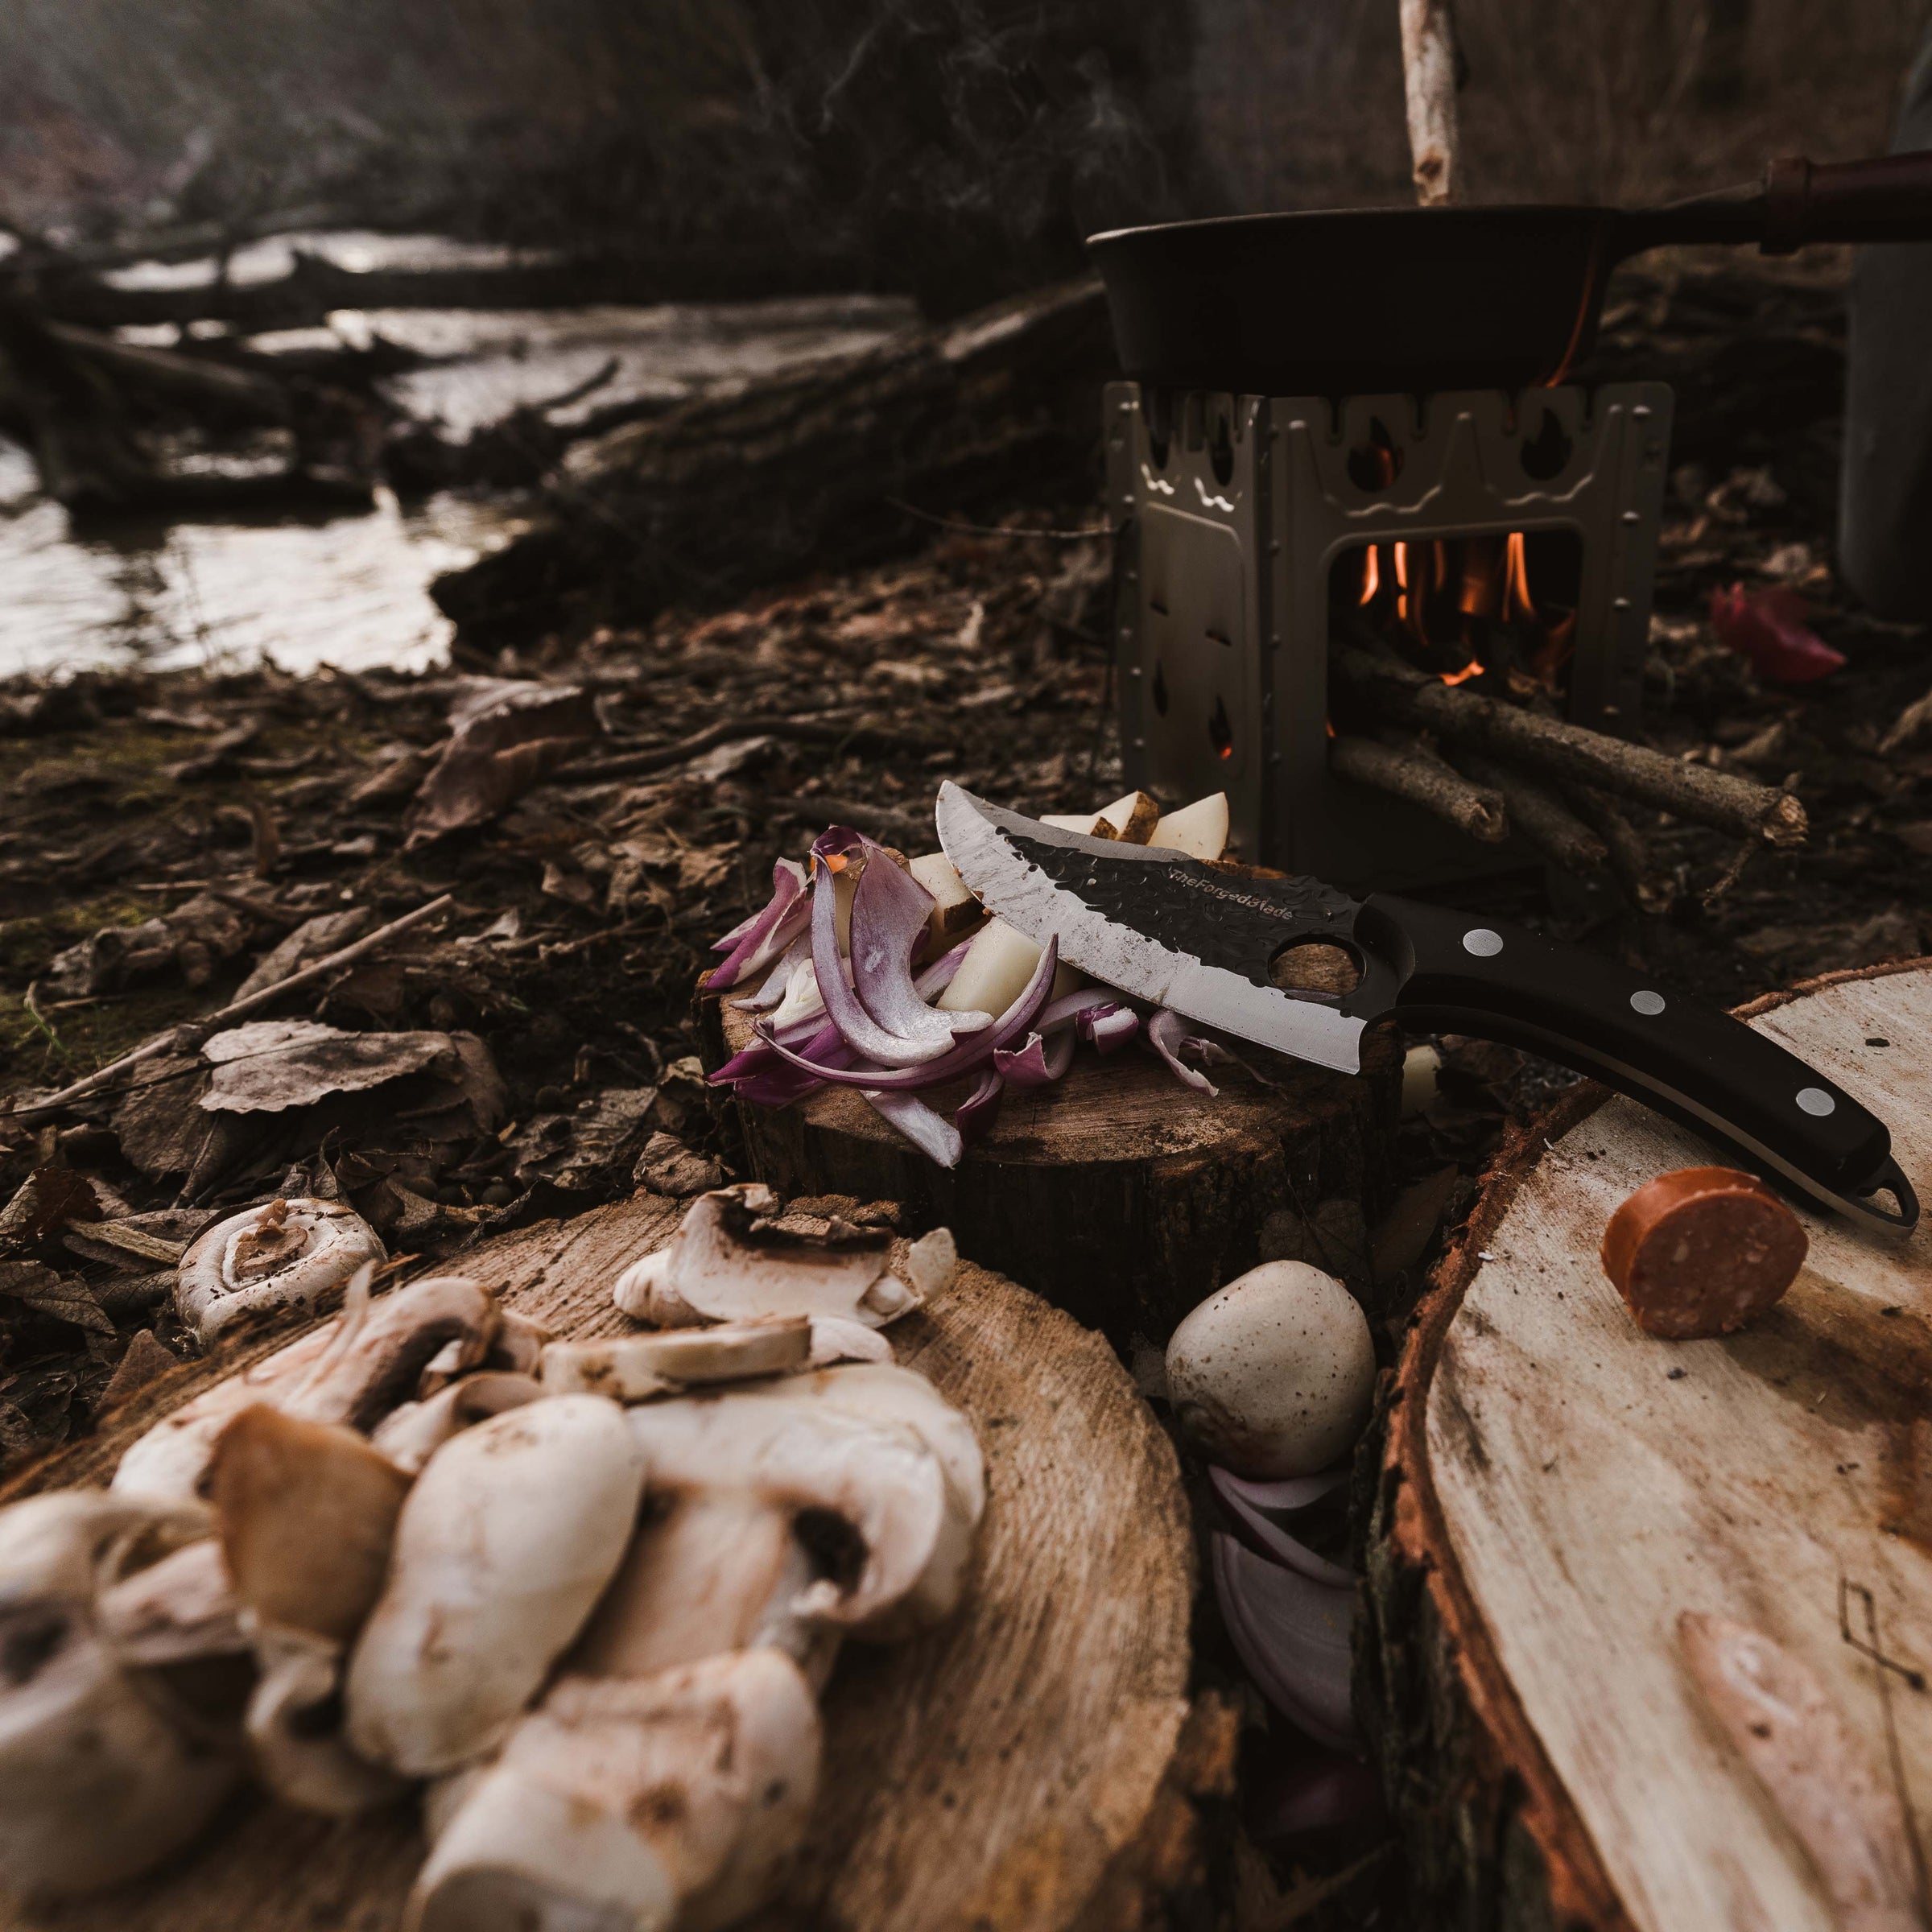 The ursa knife lying on a block of wood infront of a river and a campfire